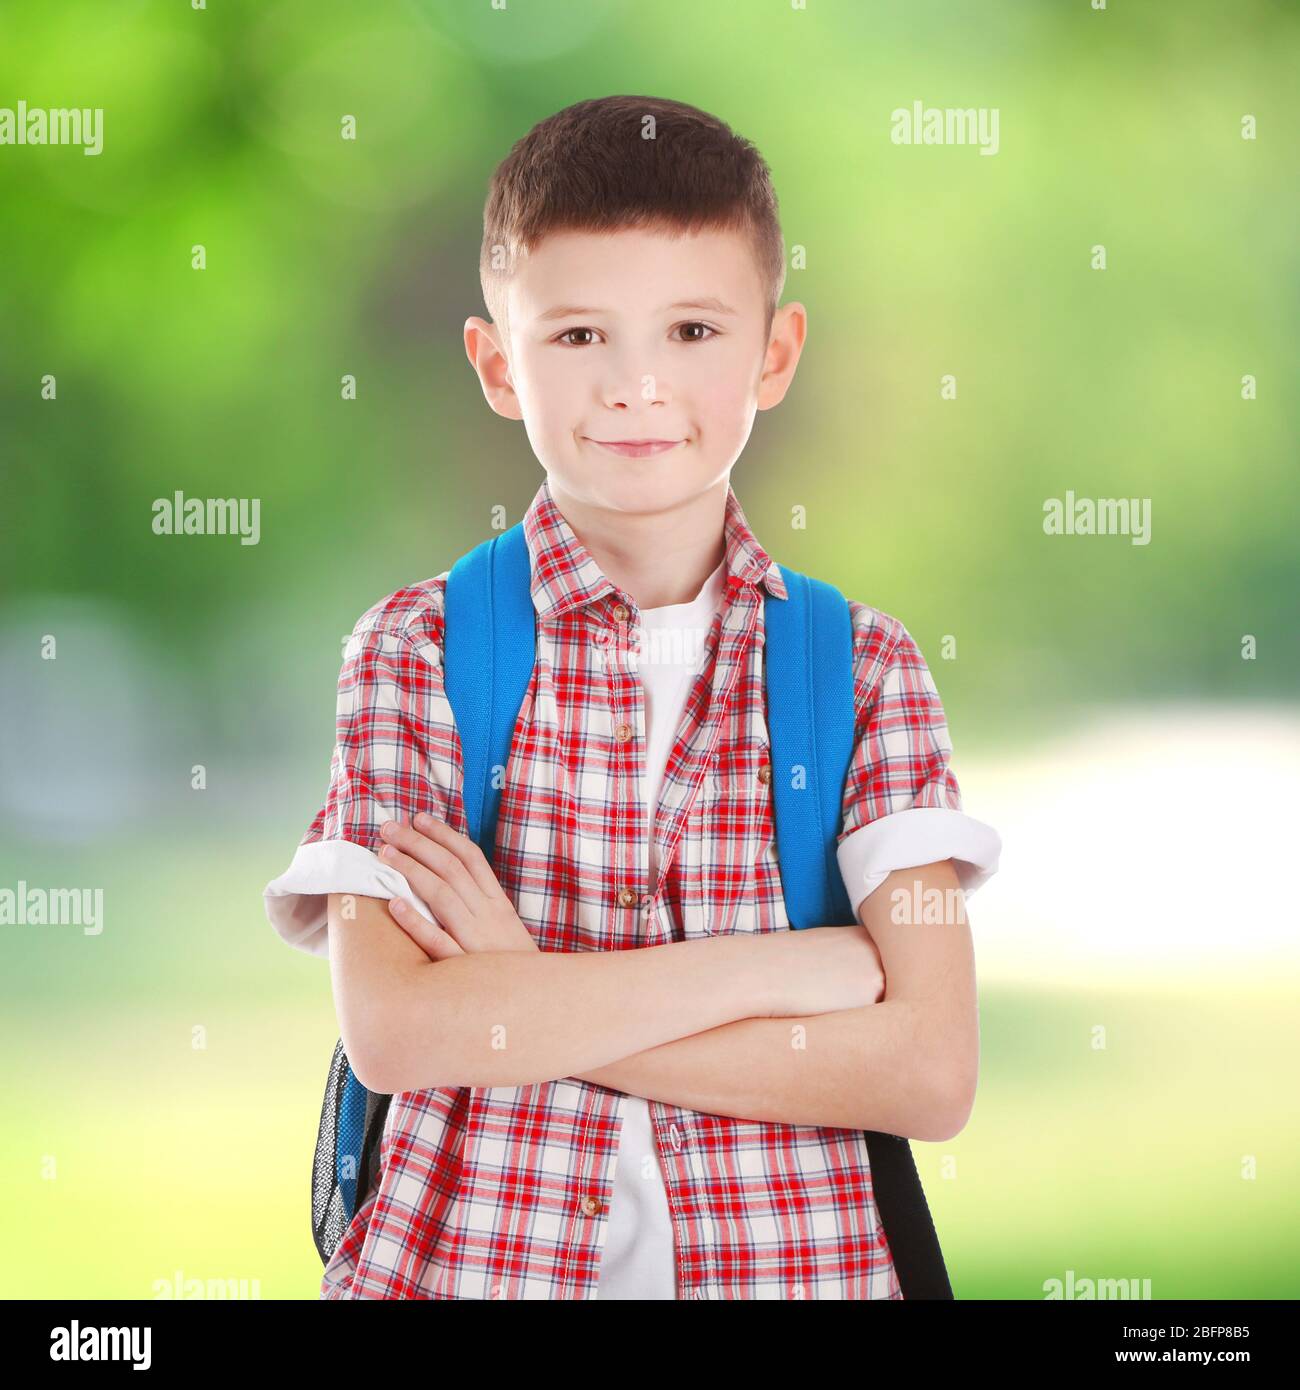 Cute boy with backpack on blurred green background. School concept ...